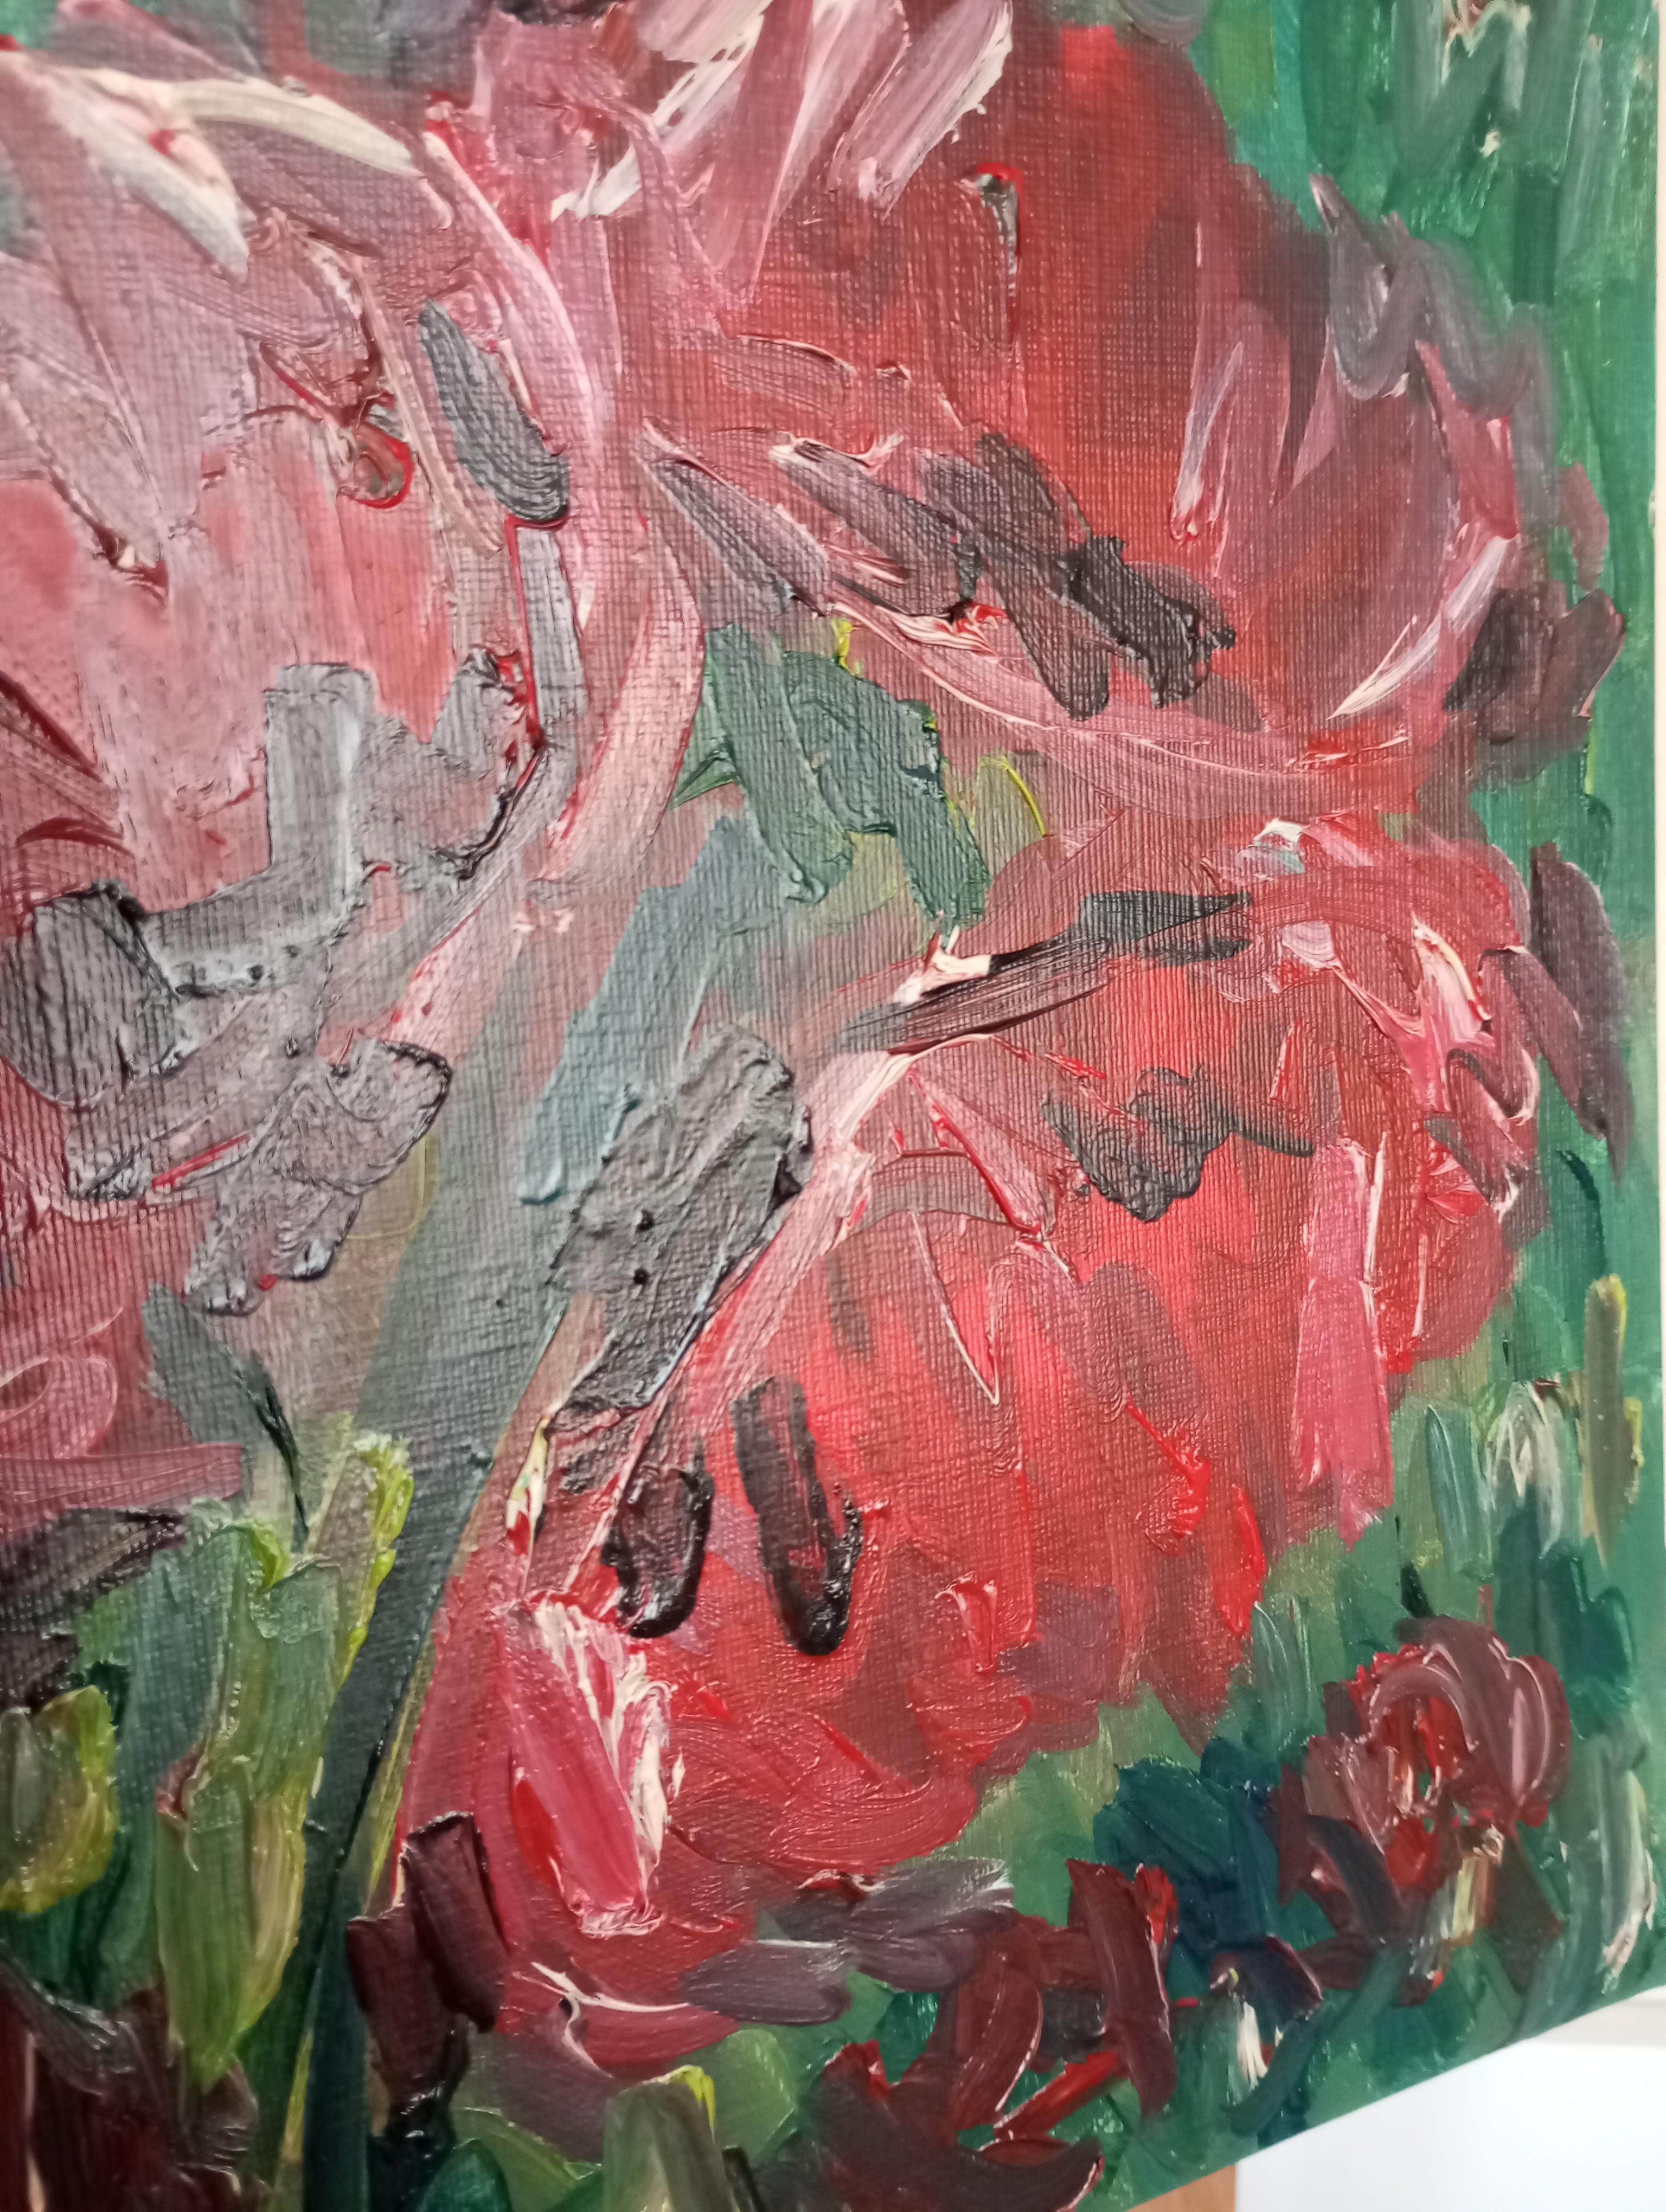 This artwork belongs to my “Floral” series which is full of expressive brush strokes where I could experience a floral theme.  It is a bold and eclectic mix of art which radiates striking colors, spontaneity, vividness, freedom and more importantly,